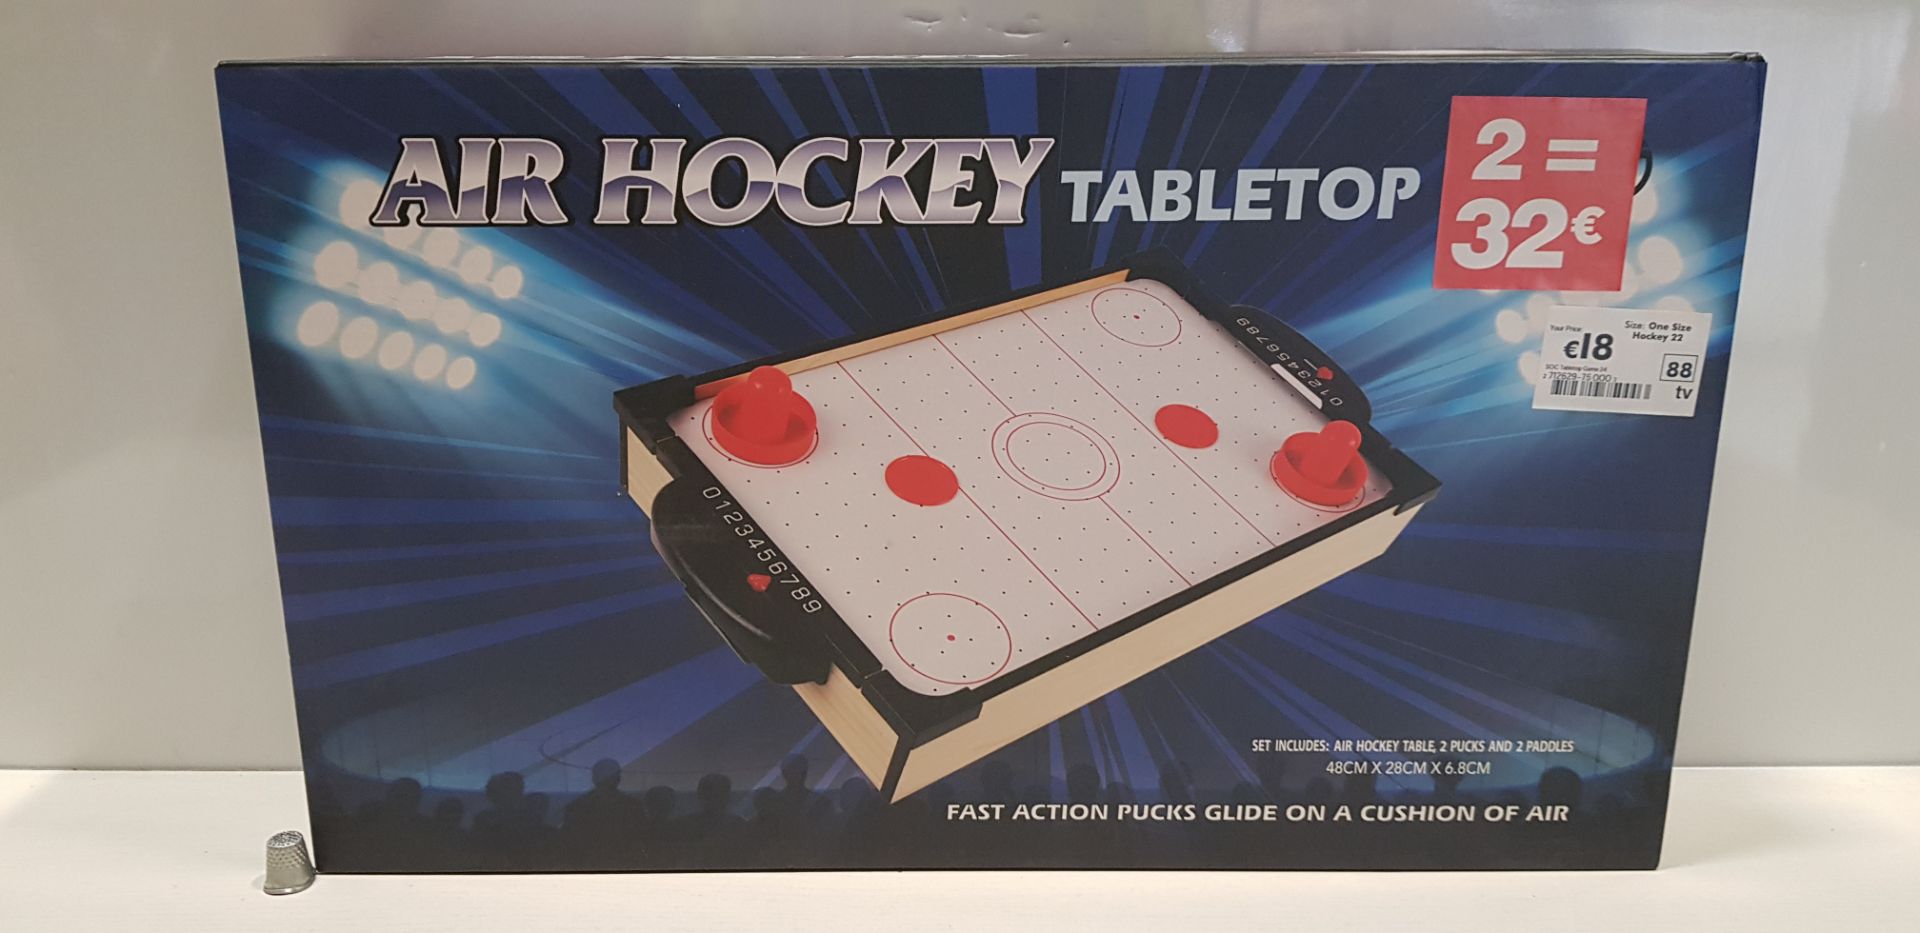 36 X BRAND NEW BOXED AIR HOCKEY TABLE TOP 48CM X 28CM X 6.8CM INCLUDES 2 X PUCKS AND 2 X PADDLES -